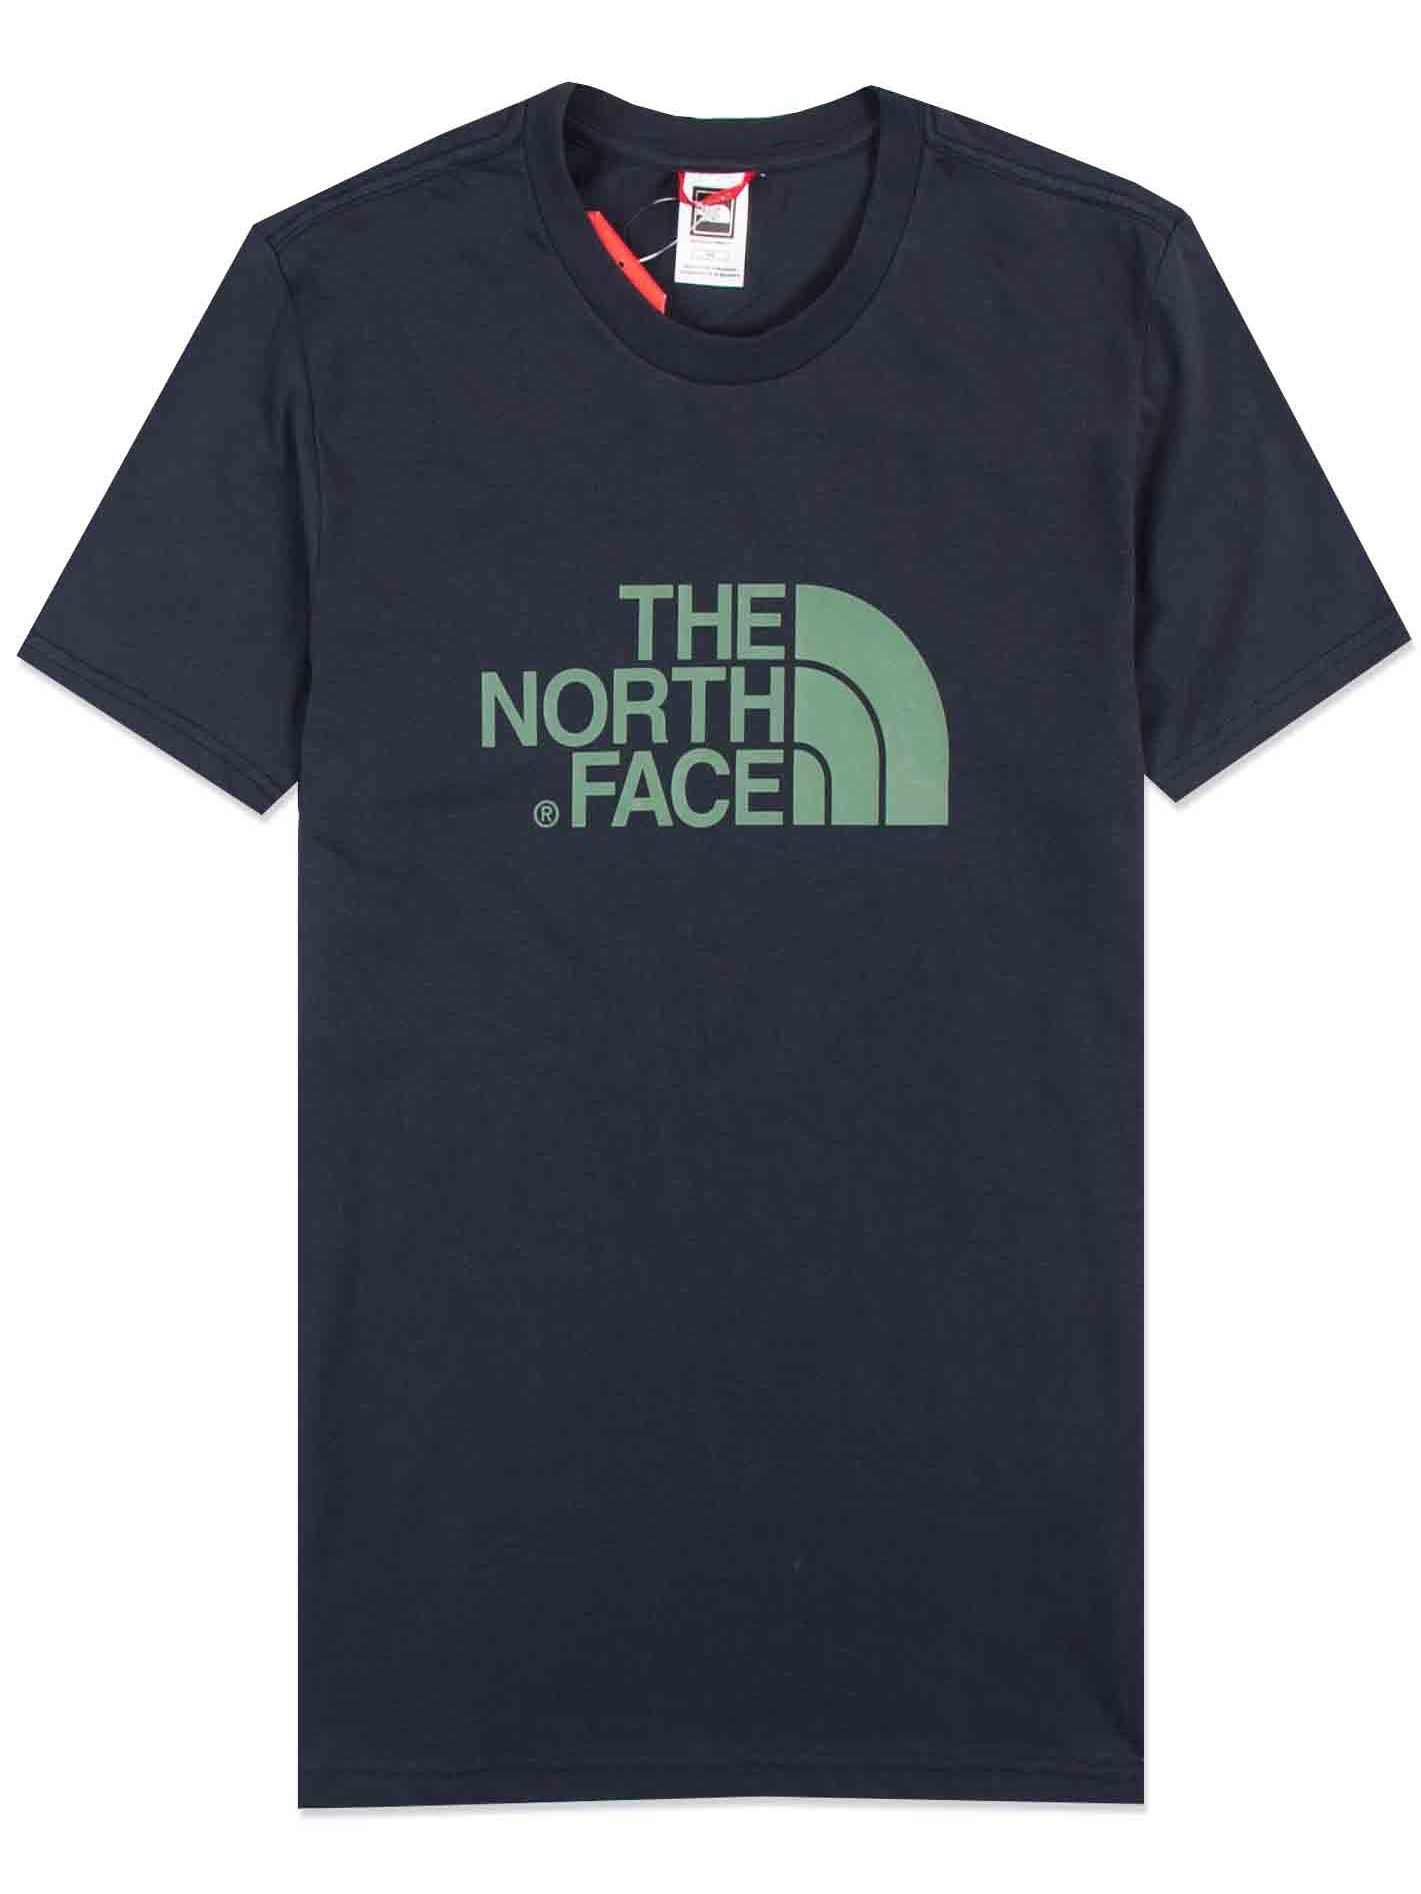 The North Face Easy T-Shirt in Urban Navy | Dapper Street